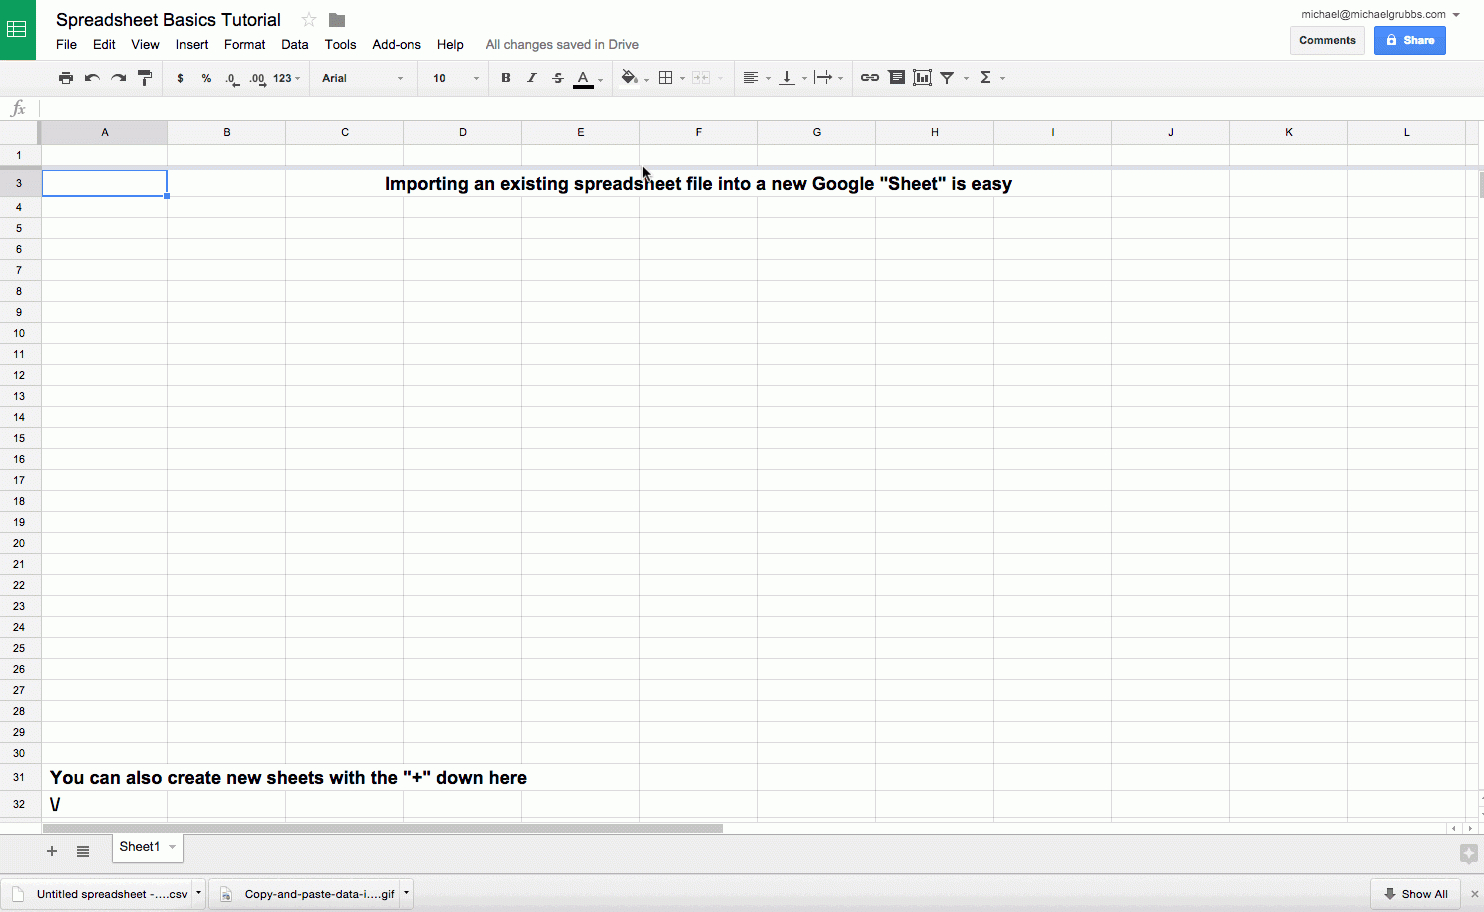 Good Spreadsheet For Google Sheets 101: The Beginner's Guide To Online Spreadsheets  The